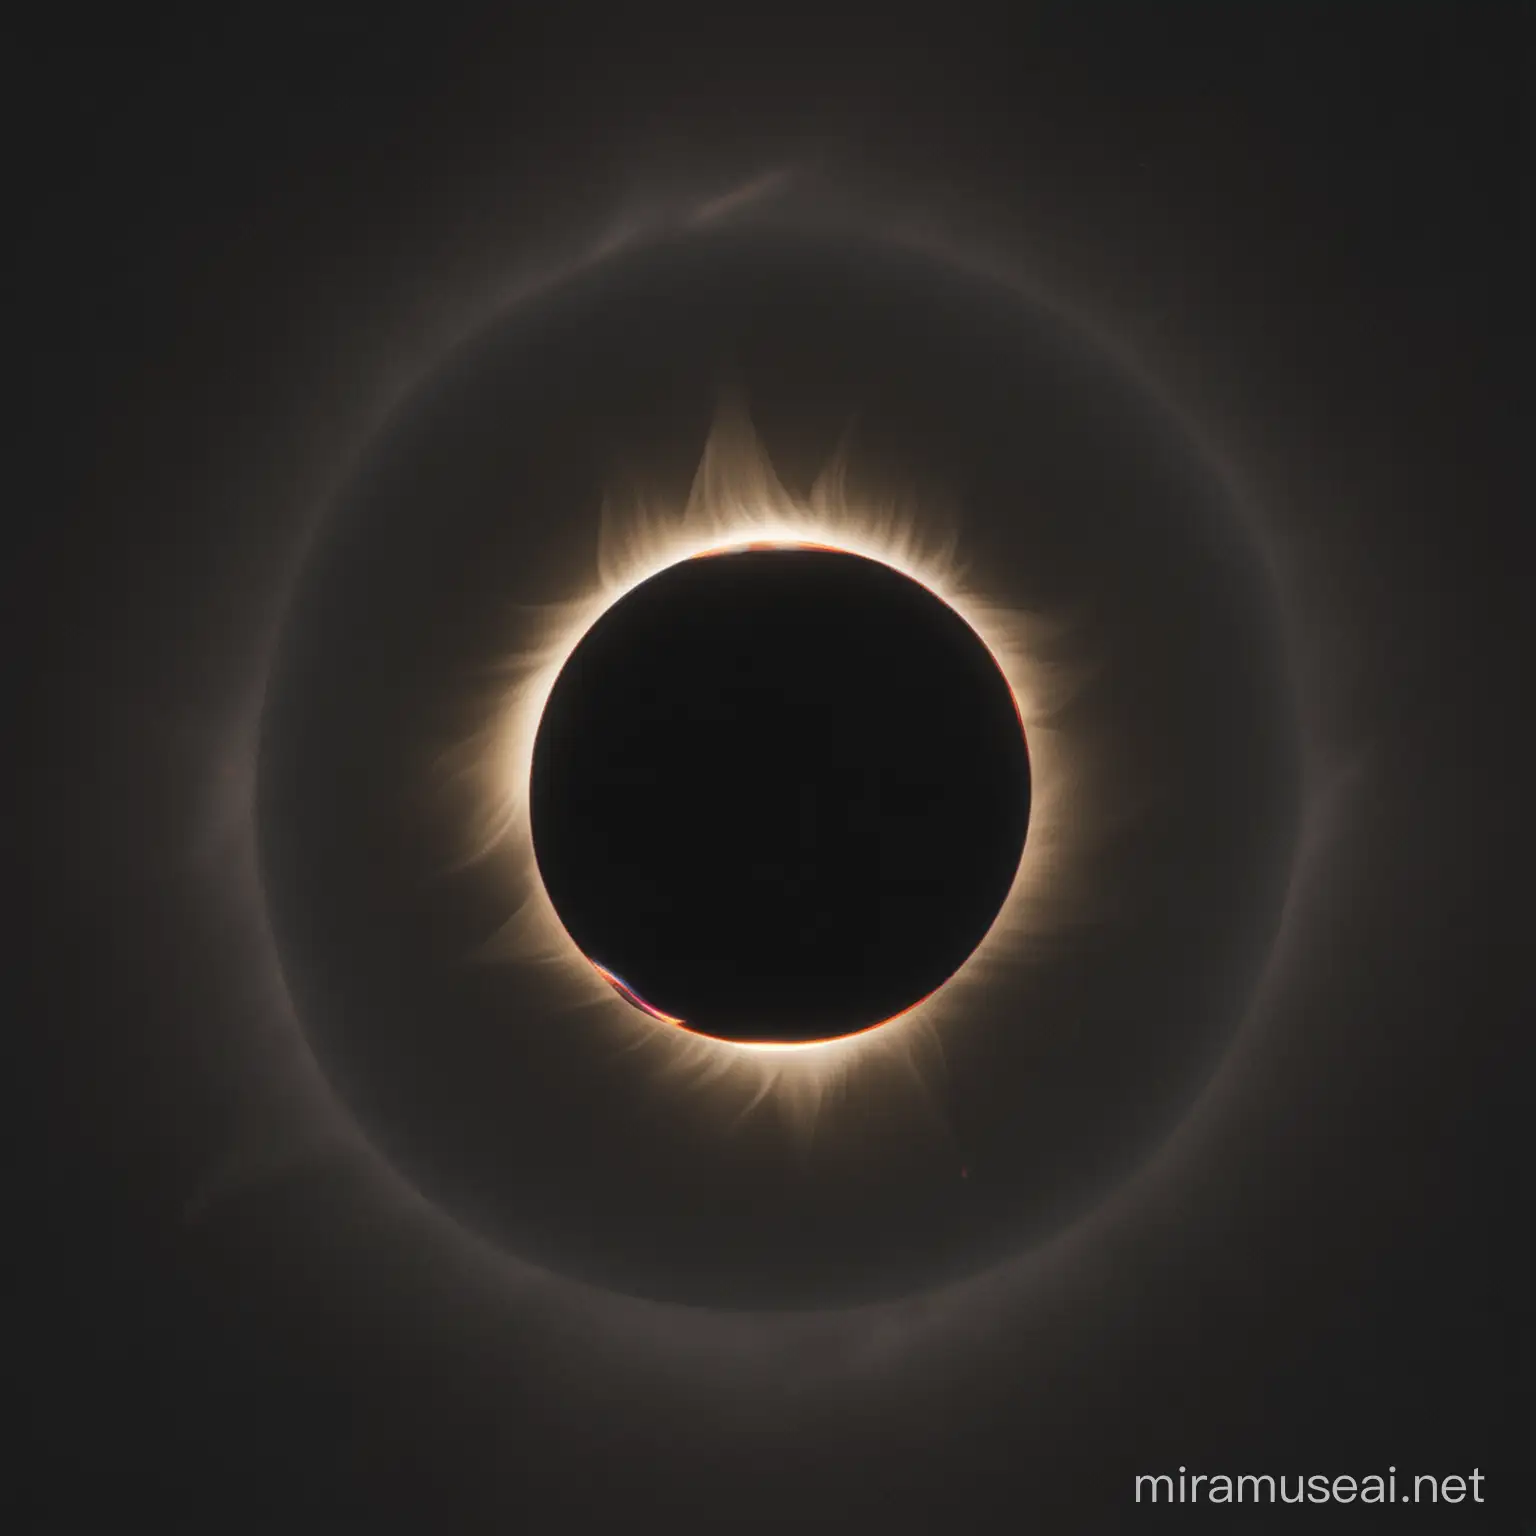 Spectacular View of a Total Solar Eclipse